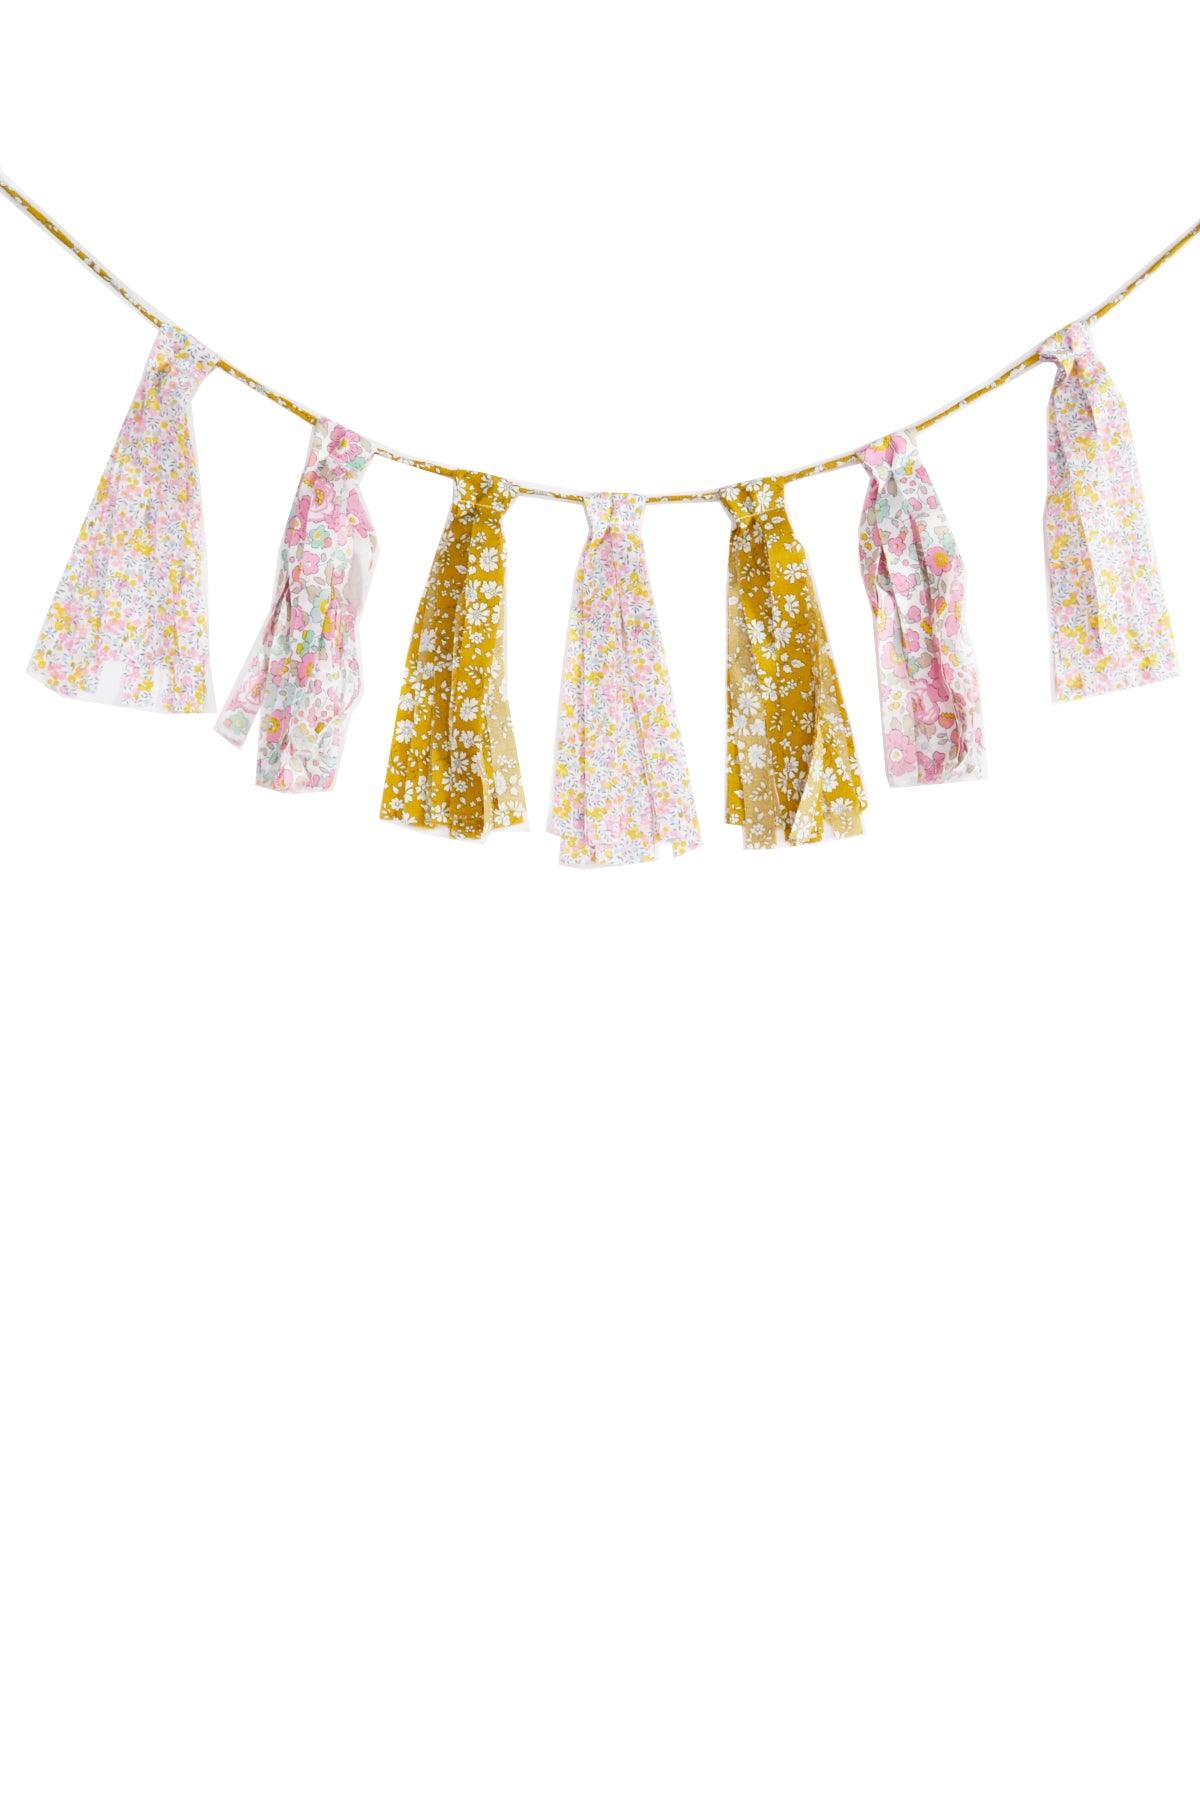 Streamer Bunting Garland made with Liberty Fabric WILTSHIRE BUD, BETSY & CAPEL - Coco & Wolf